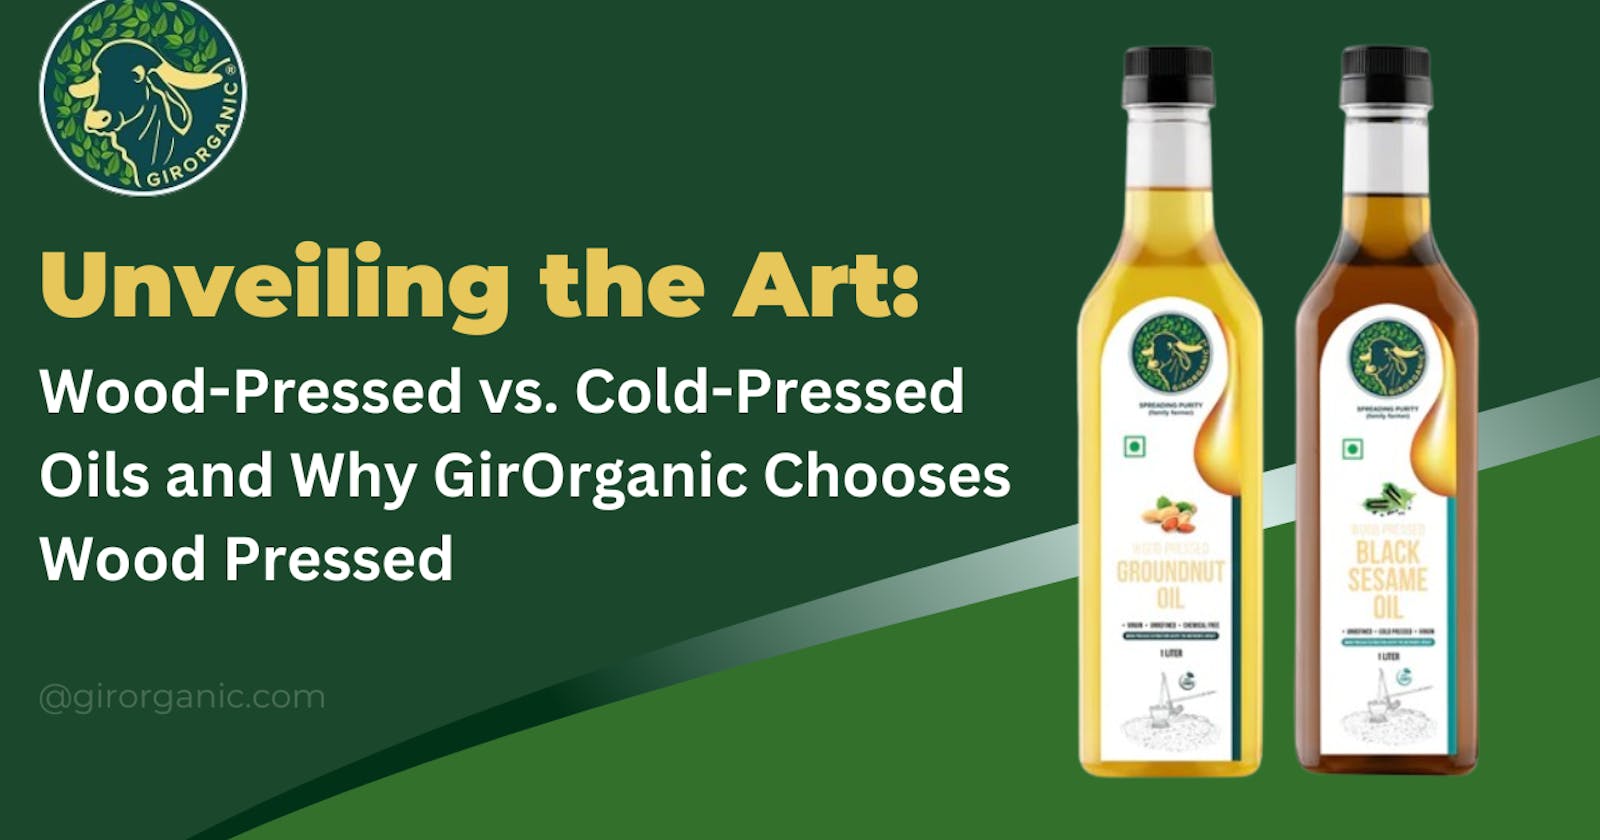 Unveiling the Art: Wood-Pressed vs. Cold-Pressed Oils and Why GirOrganic Chooses Wood Pressed